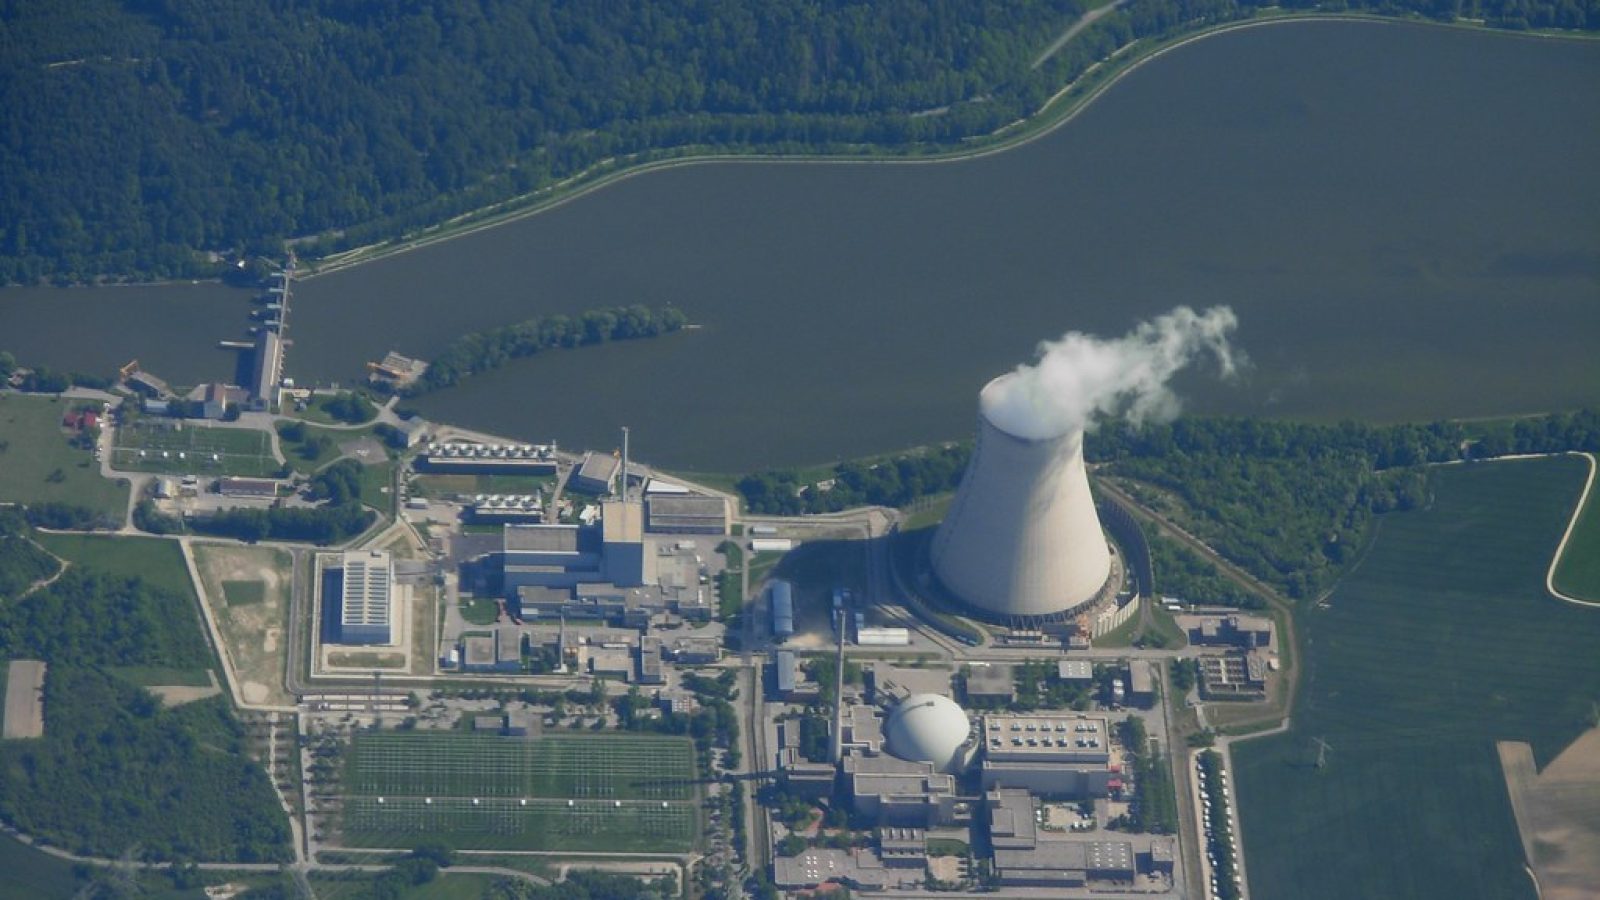 Airborne over Nuclear Power Plant Isar II, Bavaria, Germany